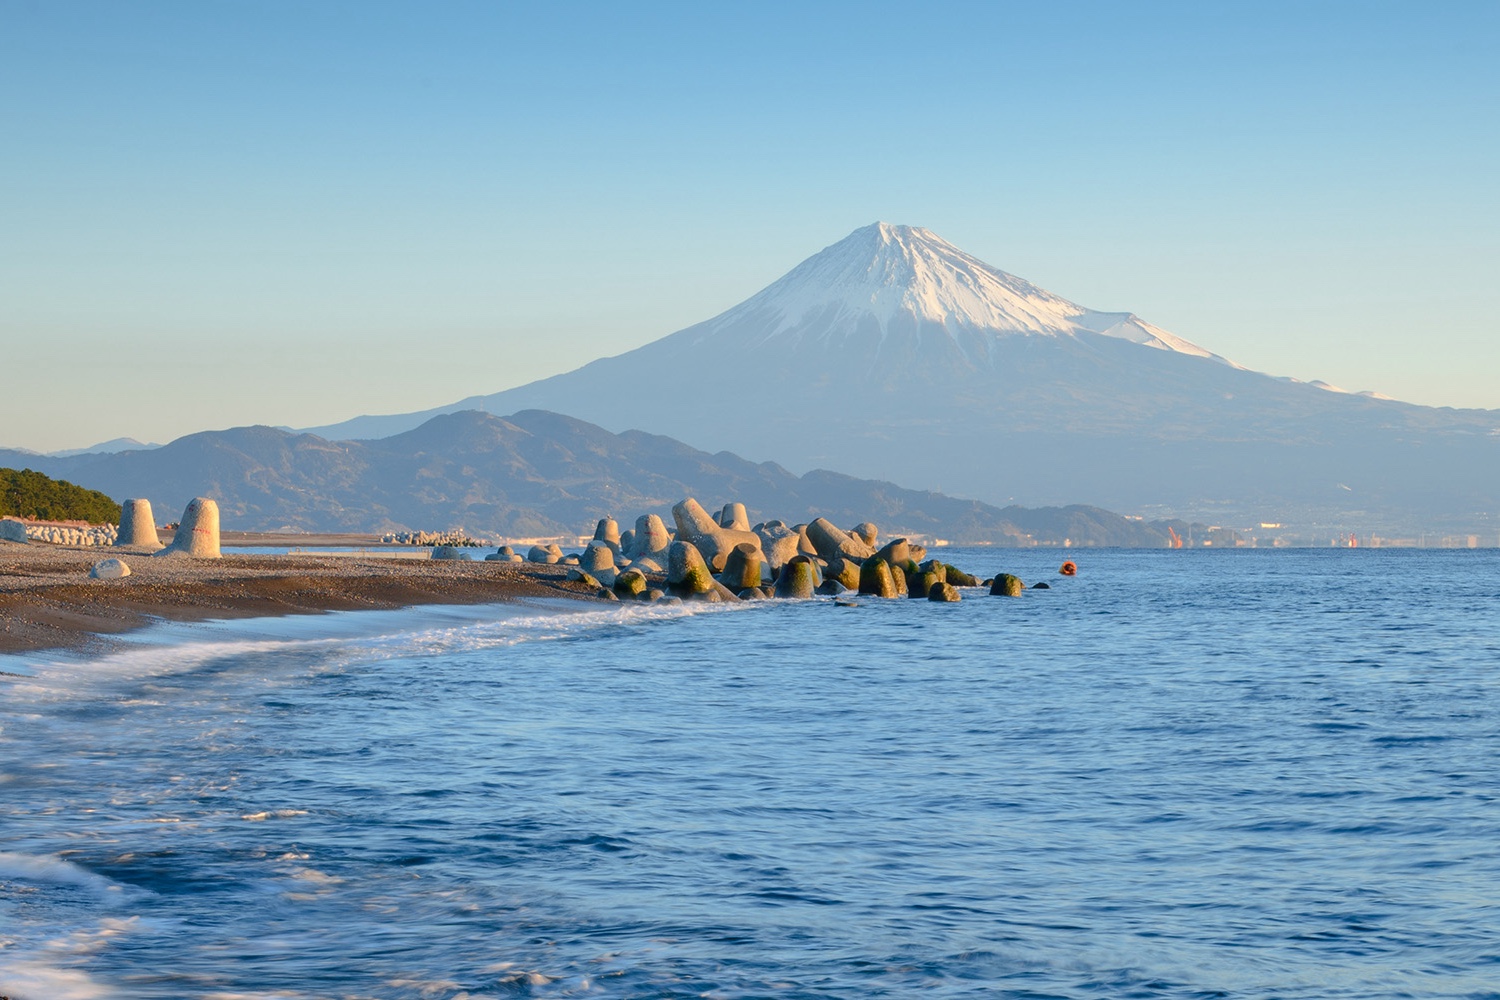 A photo from the coast of mount fuji on a sunny day, with tertrapods piled on the beach in front.